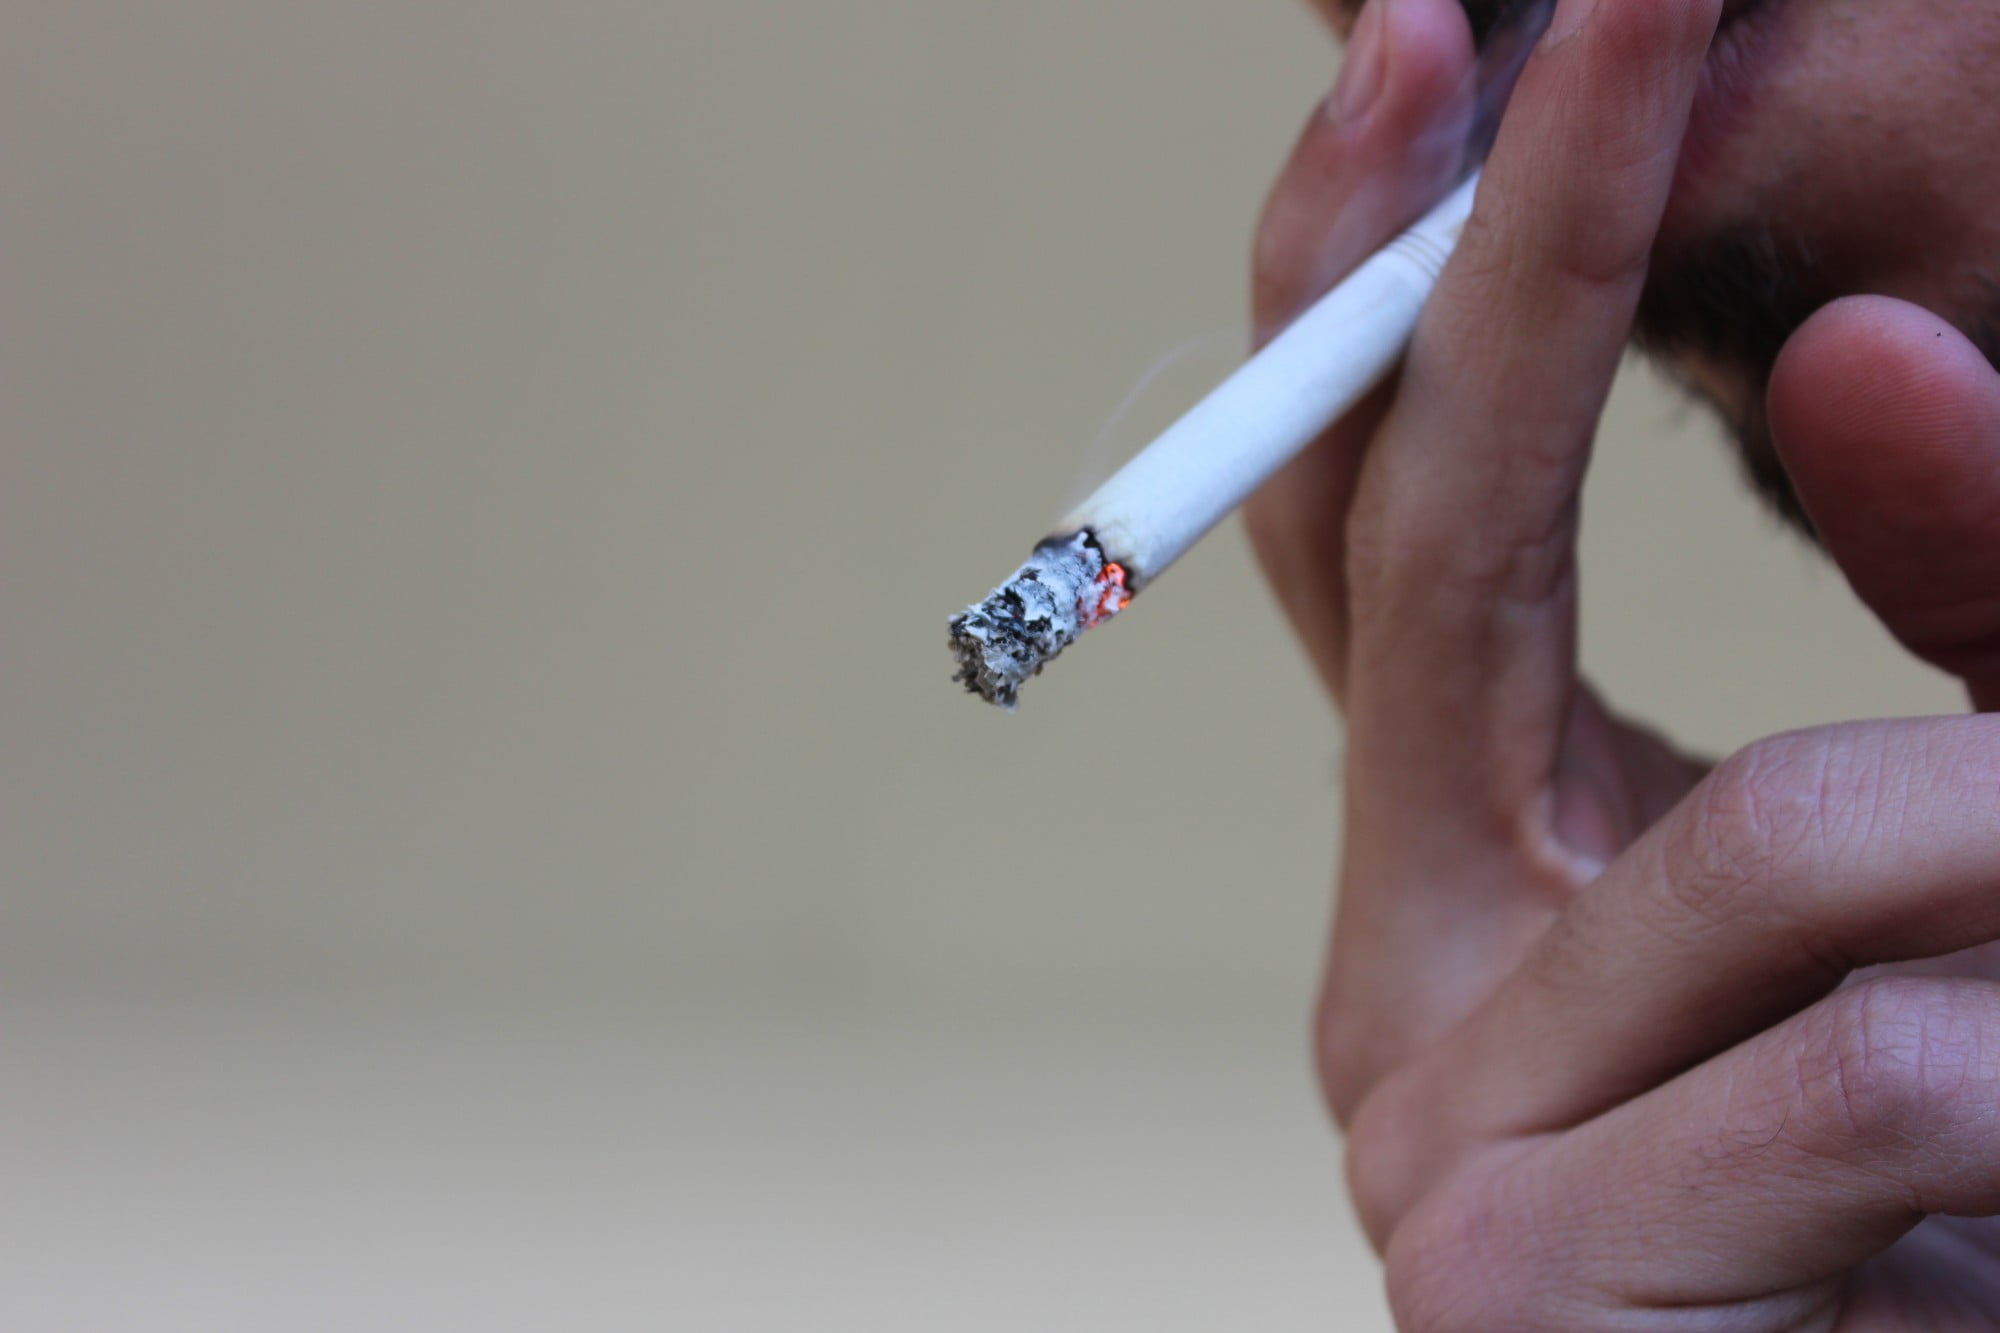 Why is nicotine addictive? Click here to learn more about the highly addictive chemical found in tobacco products and what you can do to reduce dependency.